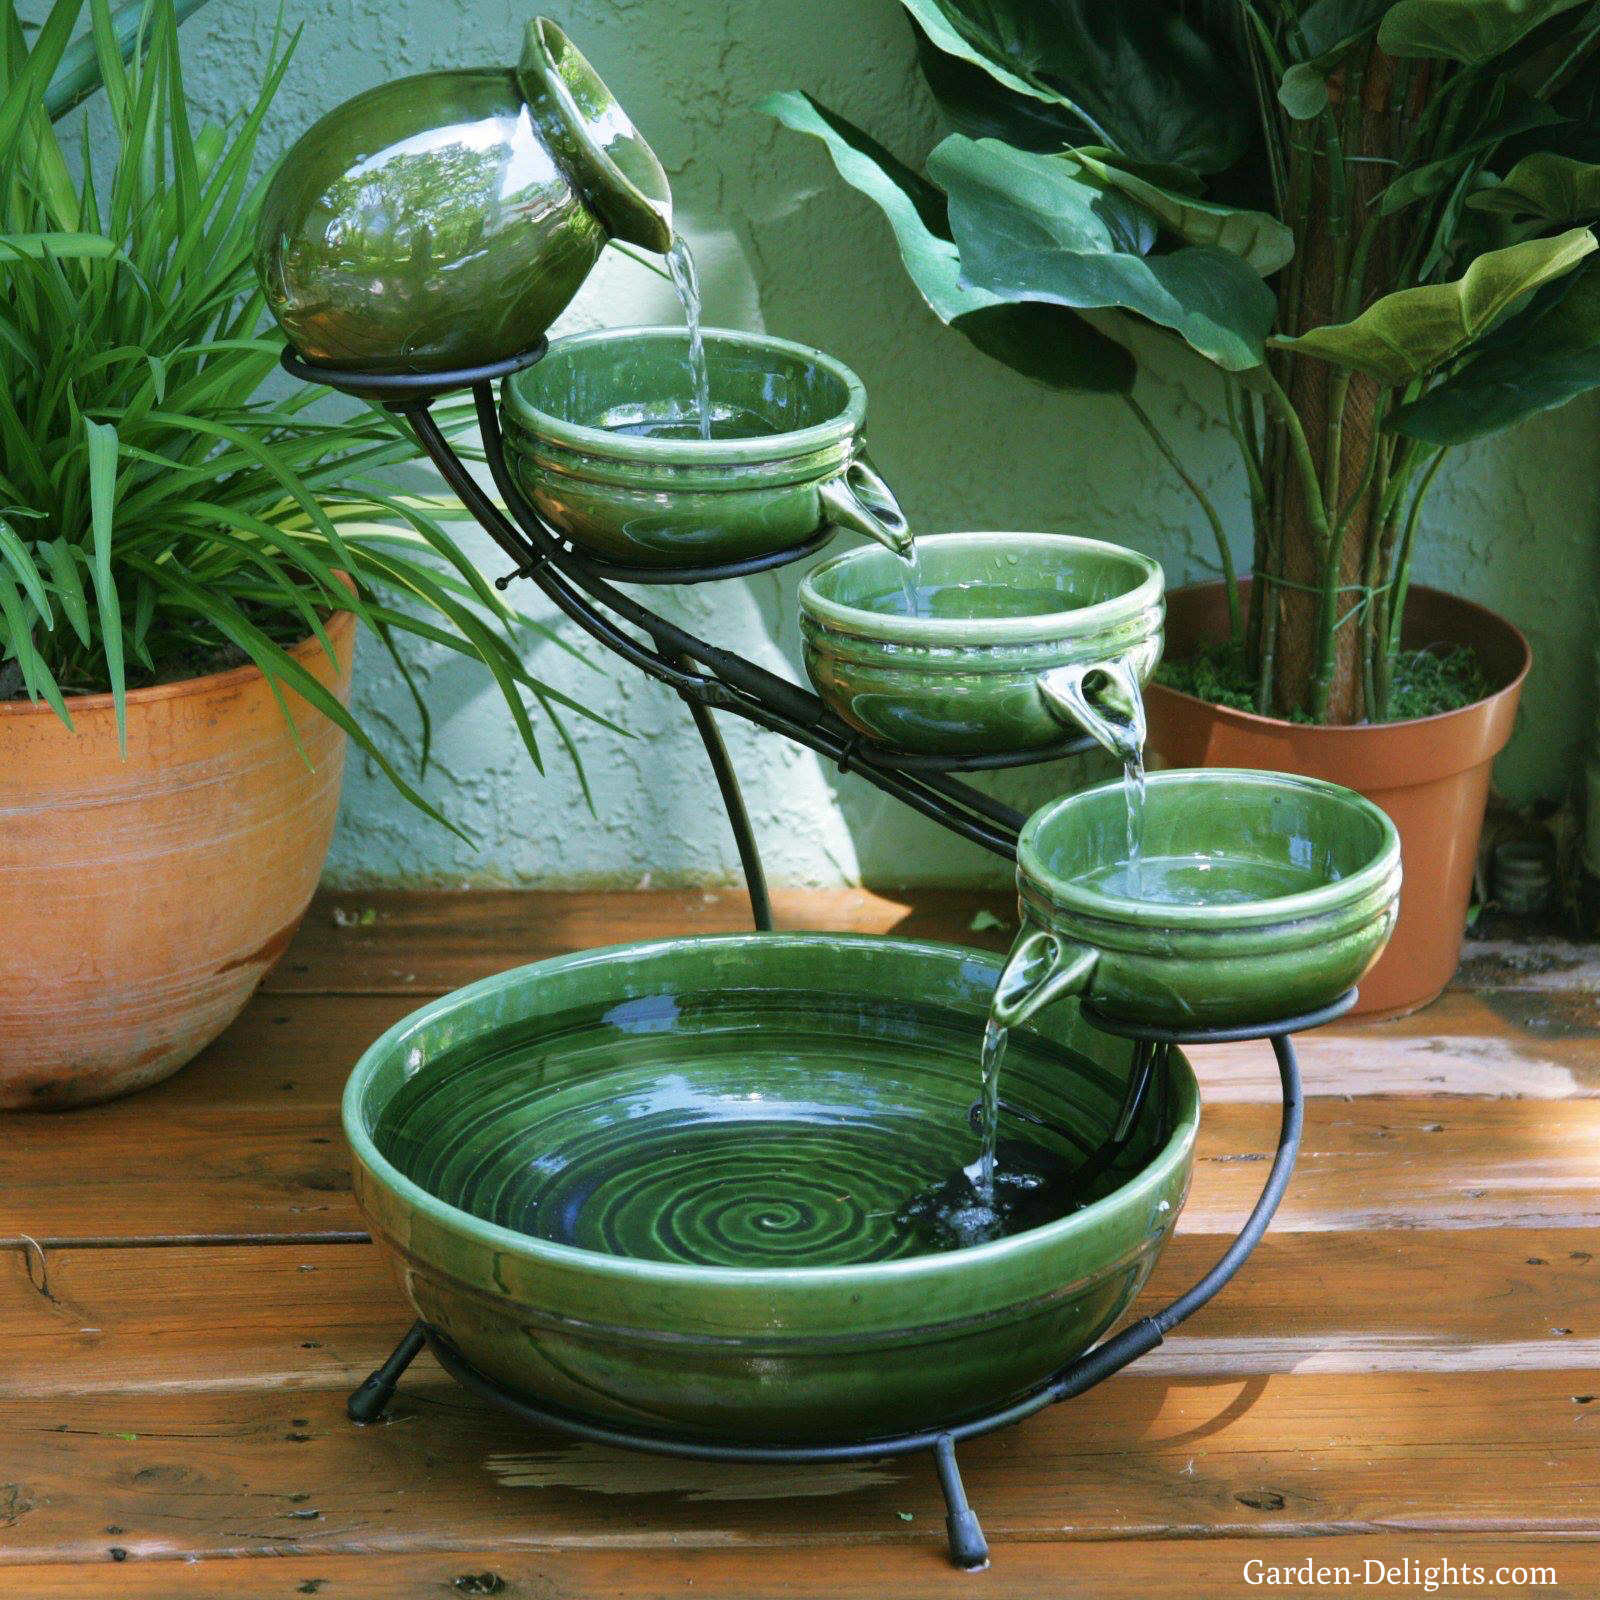  4 tier Emerald green fountain with water flowing from one water bowl to the next, small indoor water fountains, tabletop ceramic glass fountains, beautiful sounding water fountain.